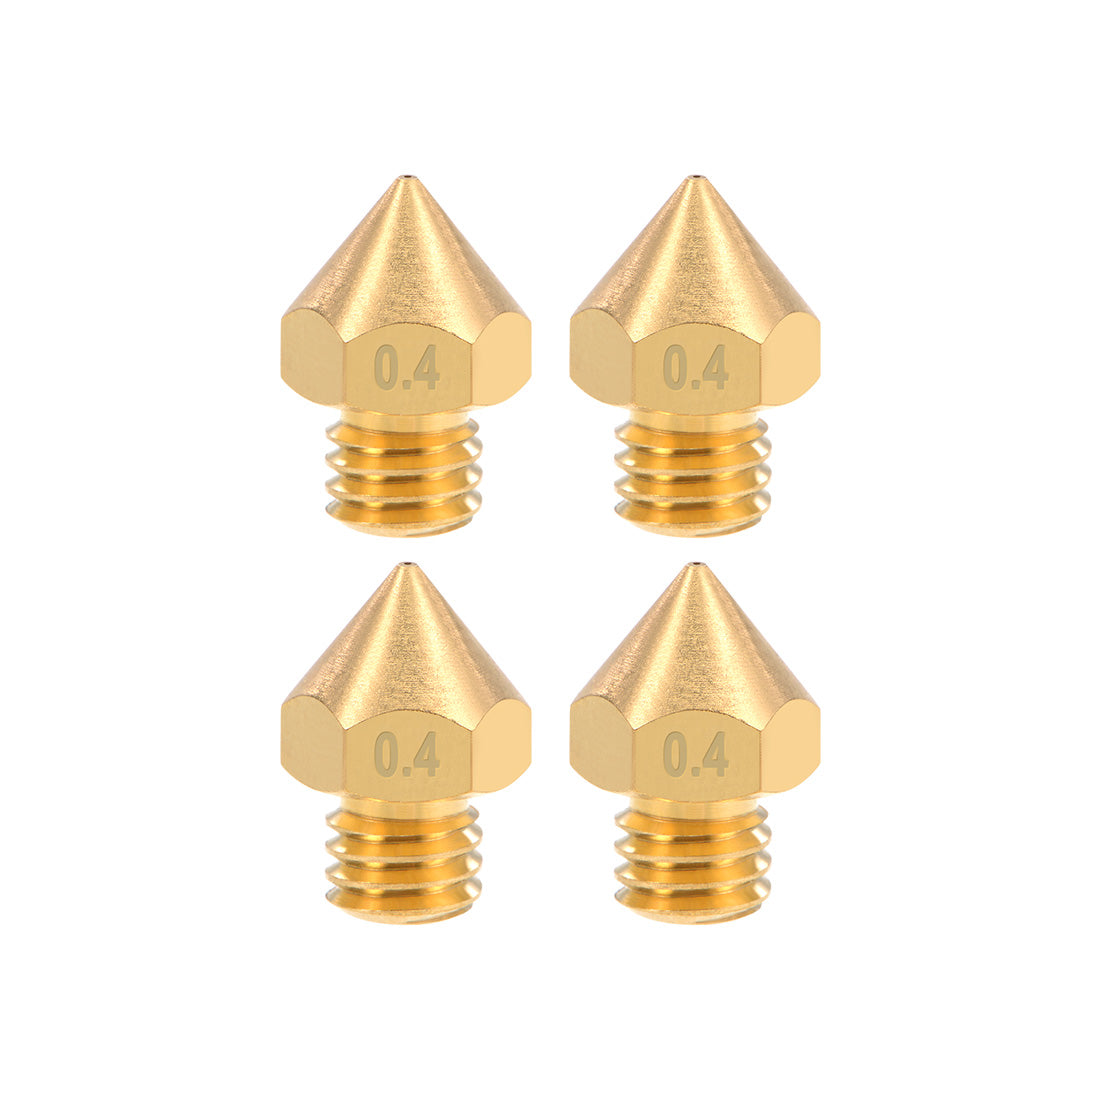 uxcell Uxcell 0.4mm 3D Printer Nozzle Head M6 Thread Replacement for MK8 1.75mm Extruder Print, Brass 4pcs